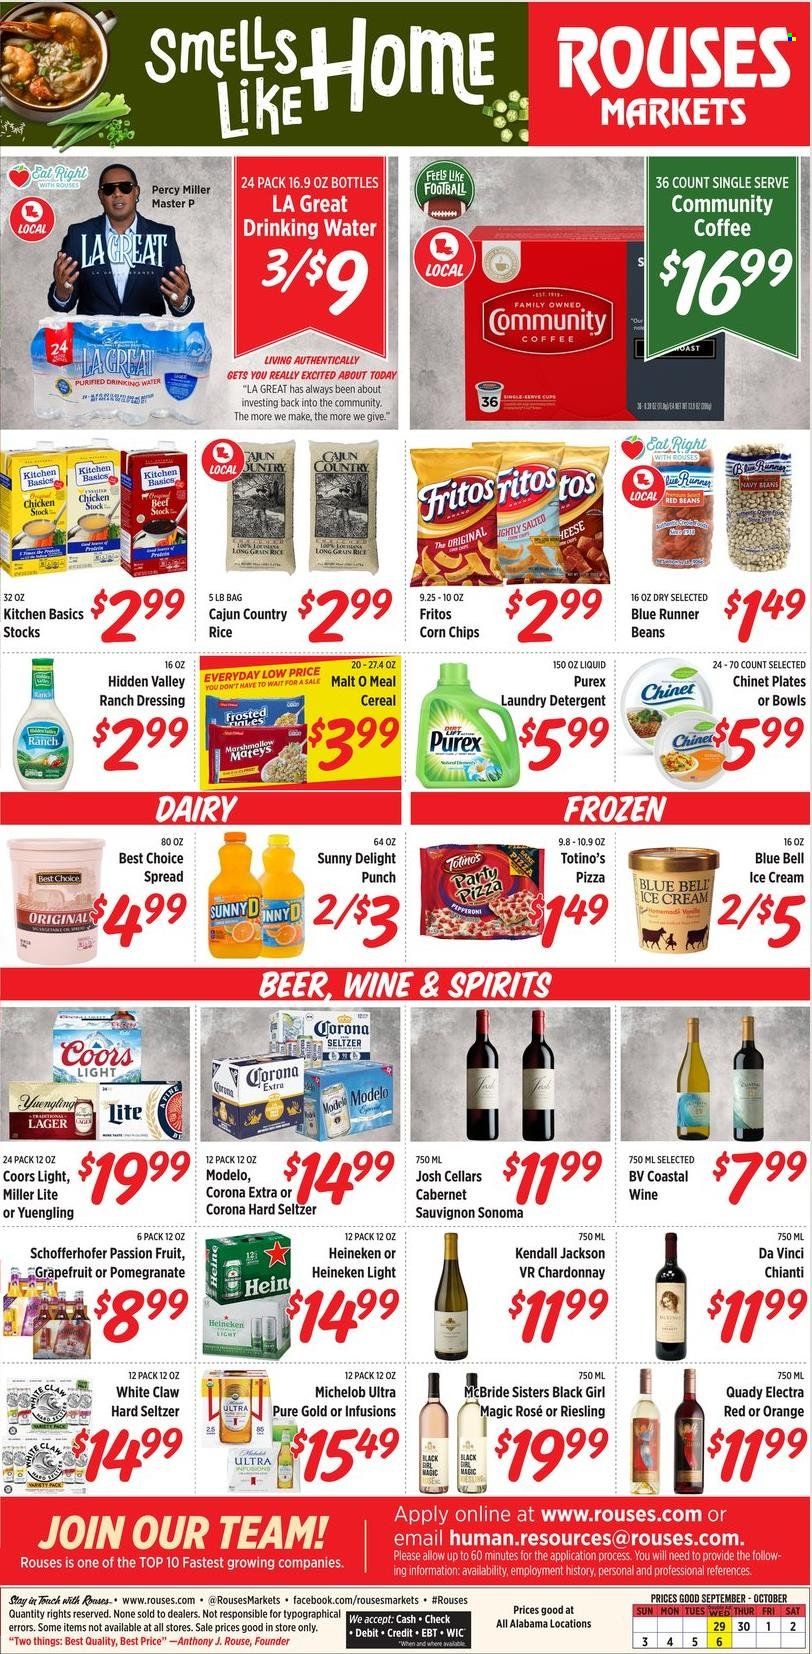 Rouses Markets ad  - 09.29.2021 - 10.06.2021.